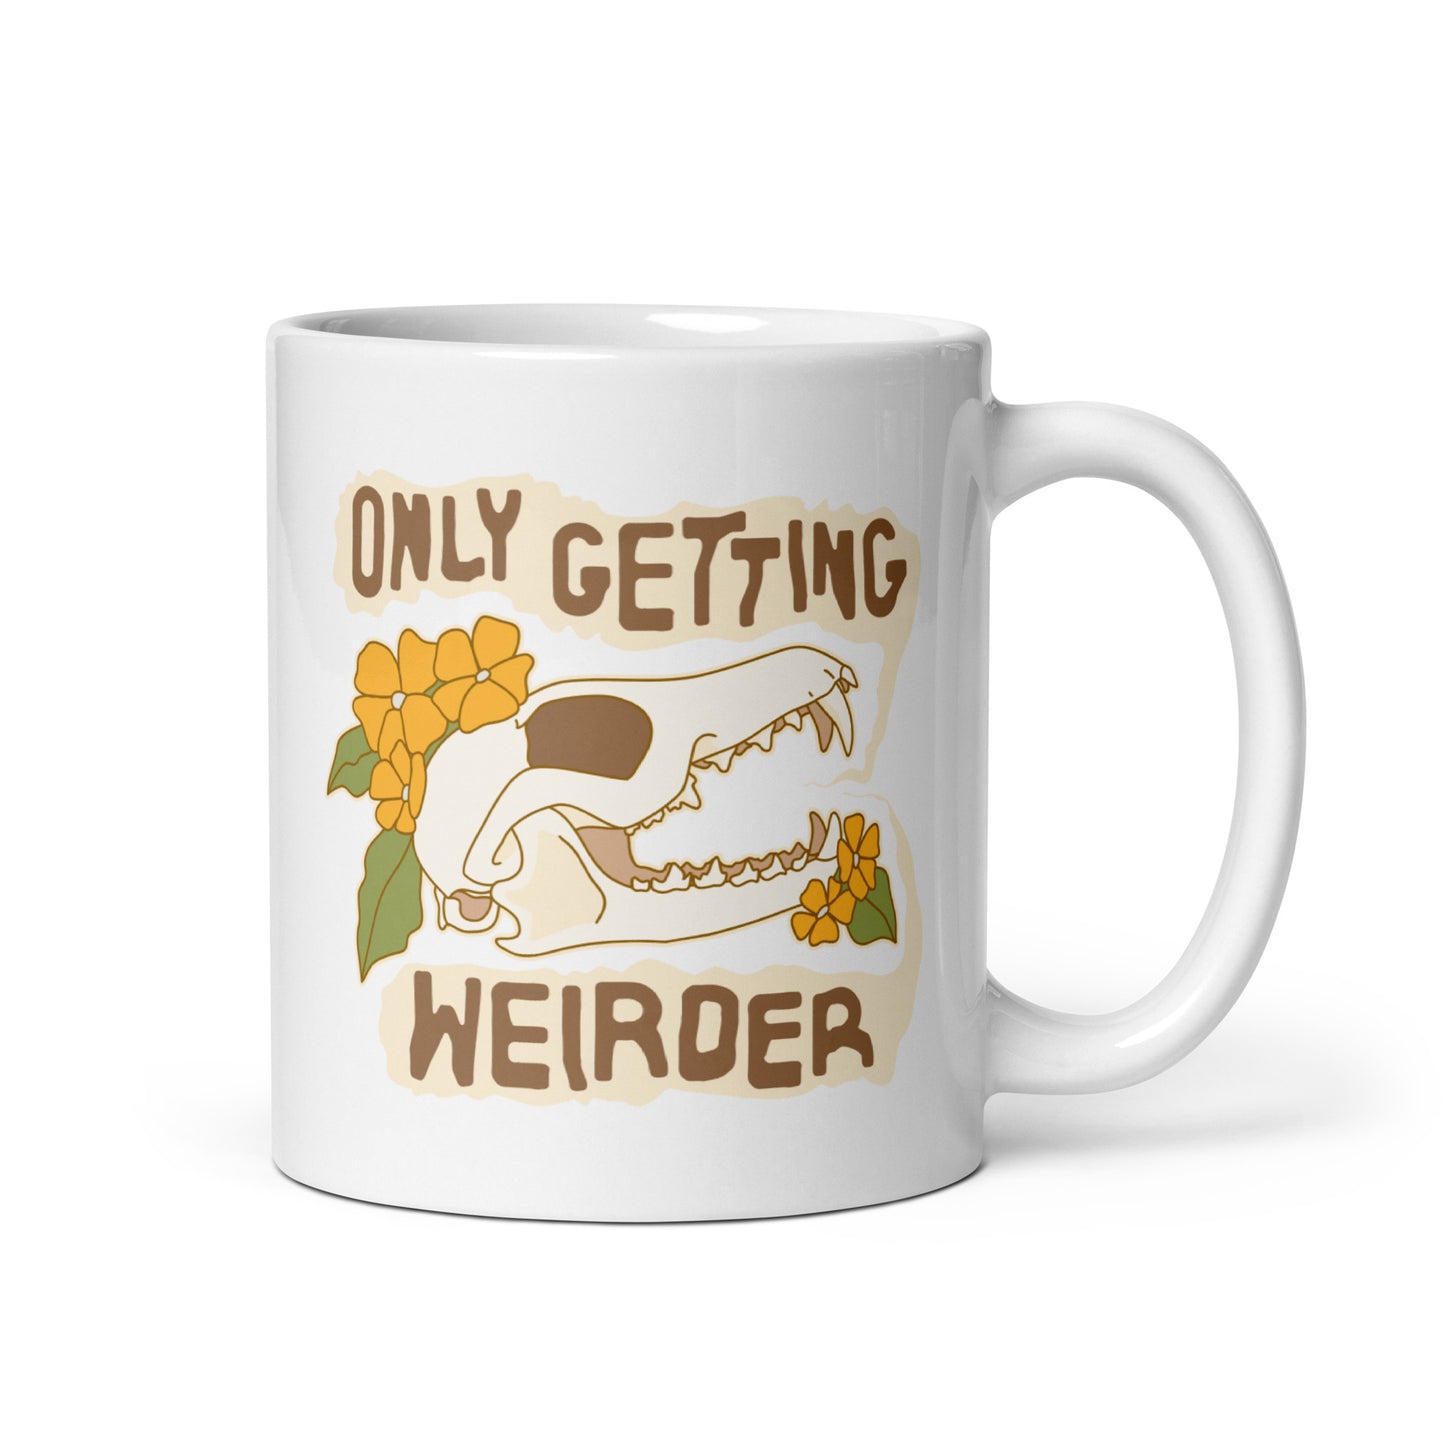 A white ceramic mug featuring an illustration of a fox skull surrounded by yellow flowers. Wobbly speech bubbles are coming from the fox's mouth. The text inside the bubbles reads "ONLY GETTING WEIRDER".